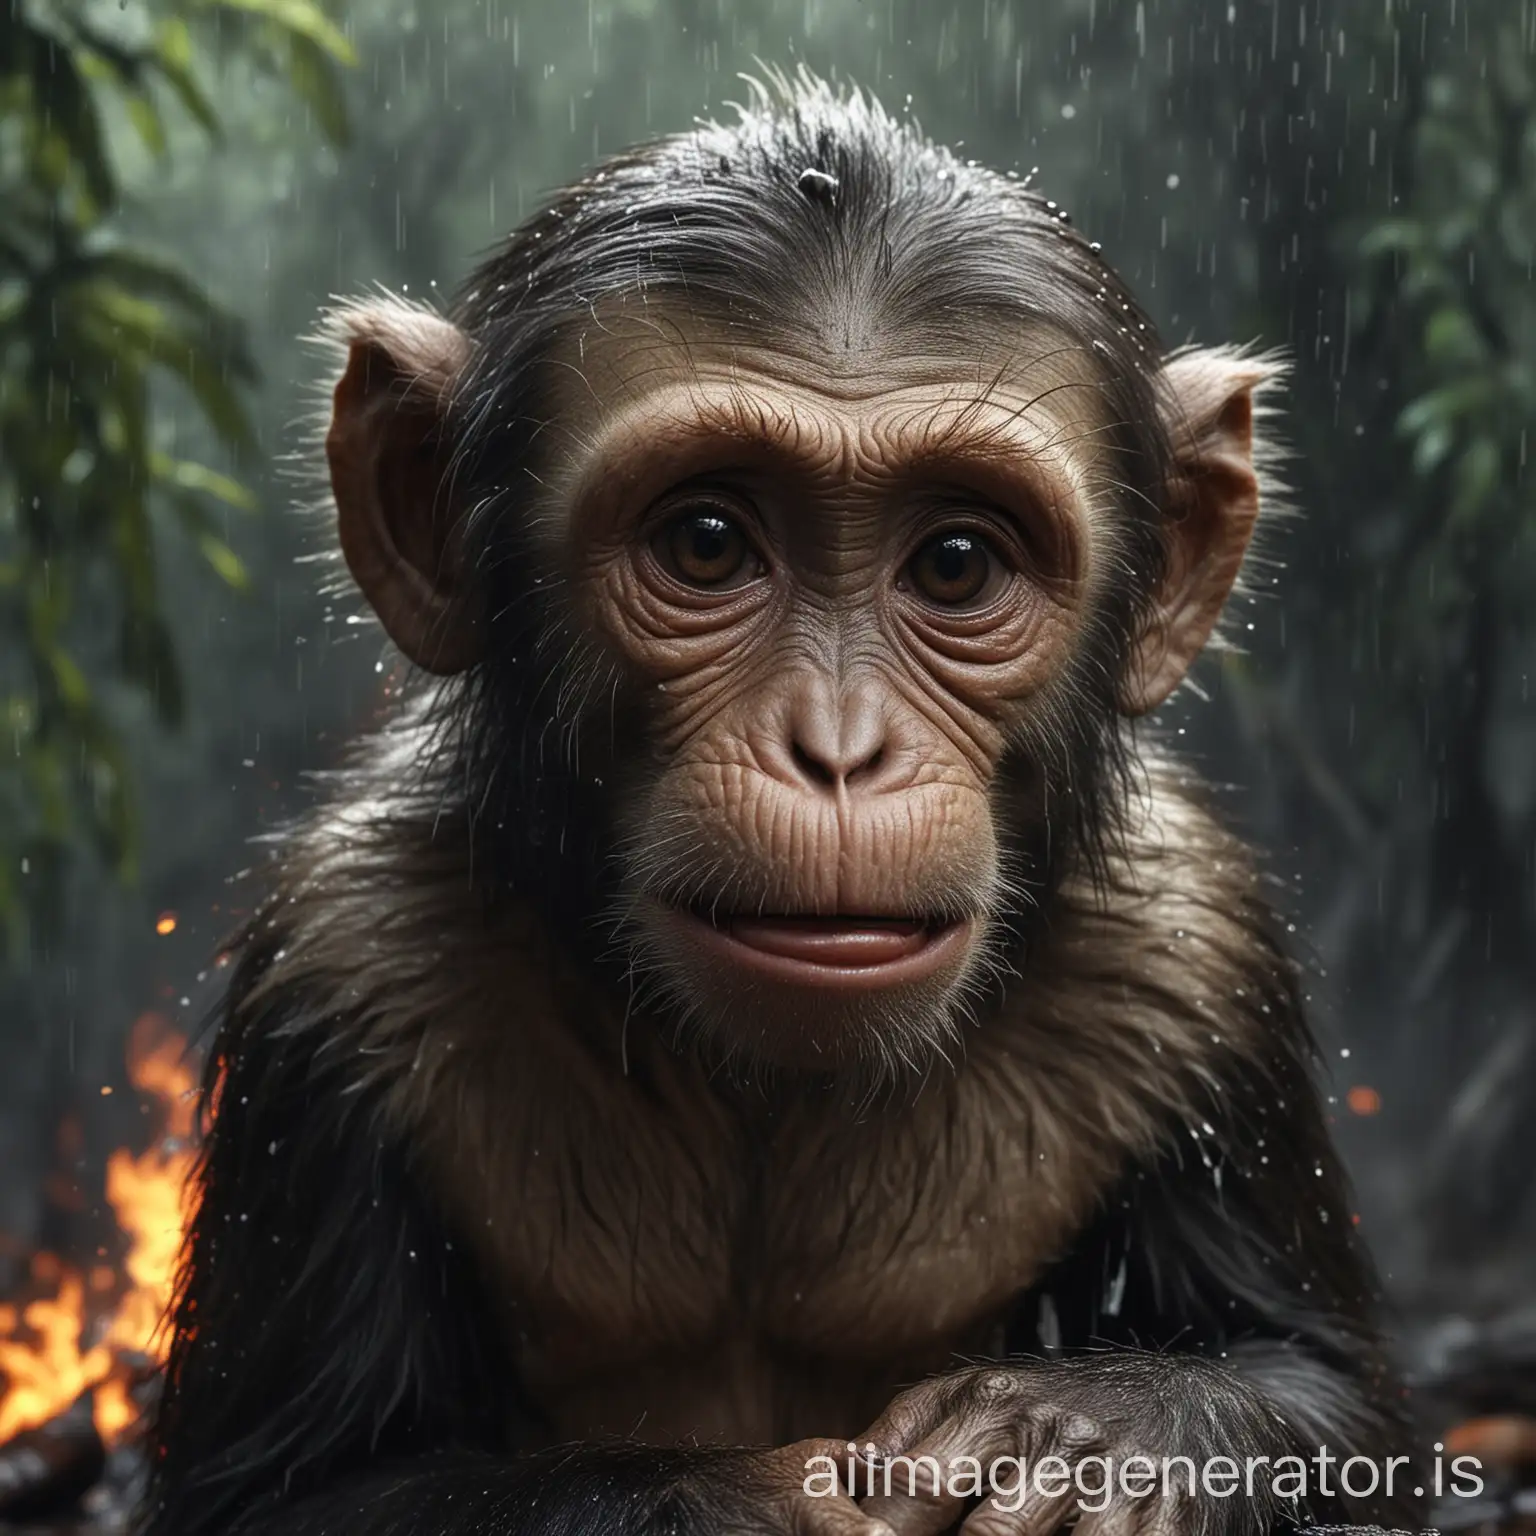 professional shoot of a sad crying monkey, tears, destruction, burning rainforest, fear, heavy rain, 3D, high resolution, perfect quality, real photography